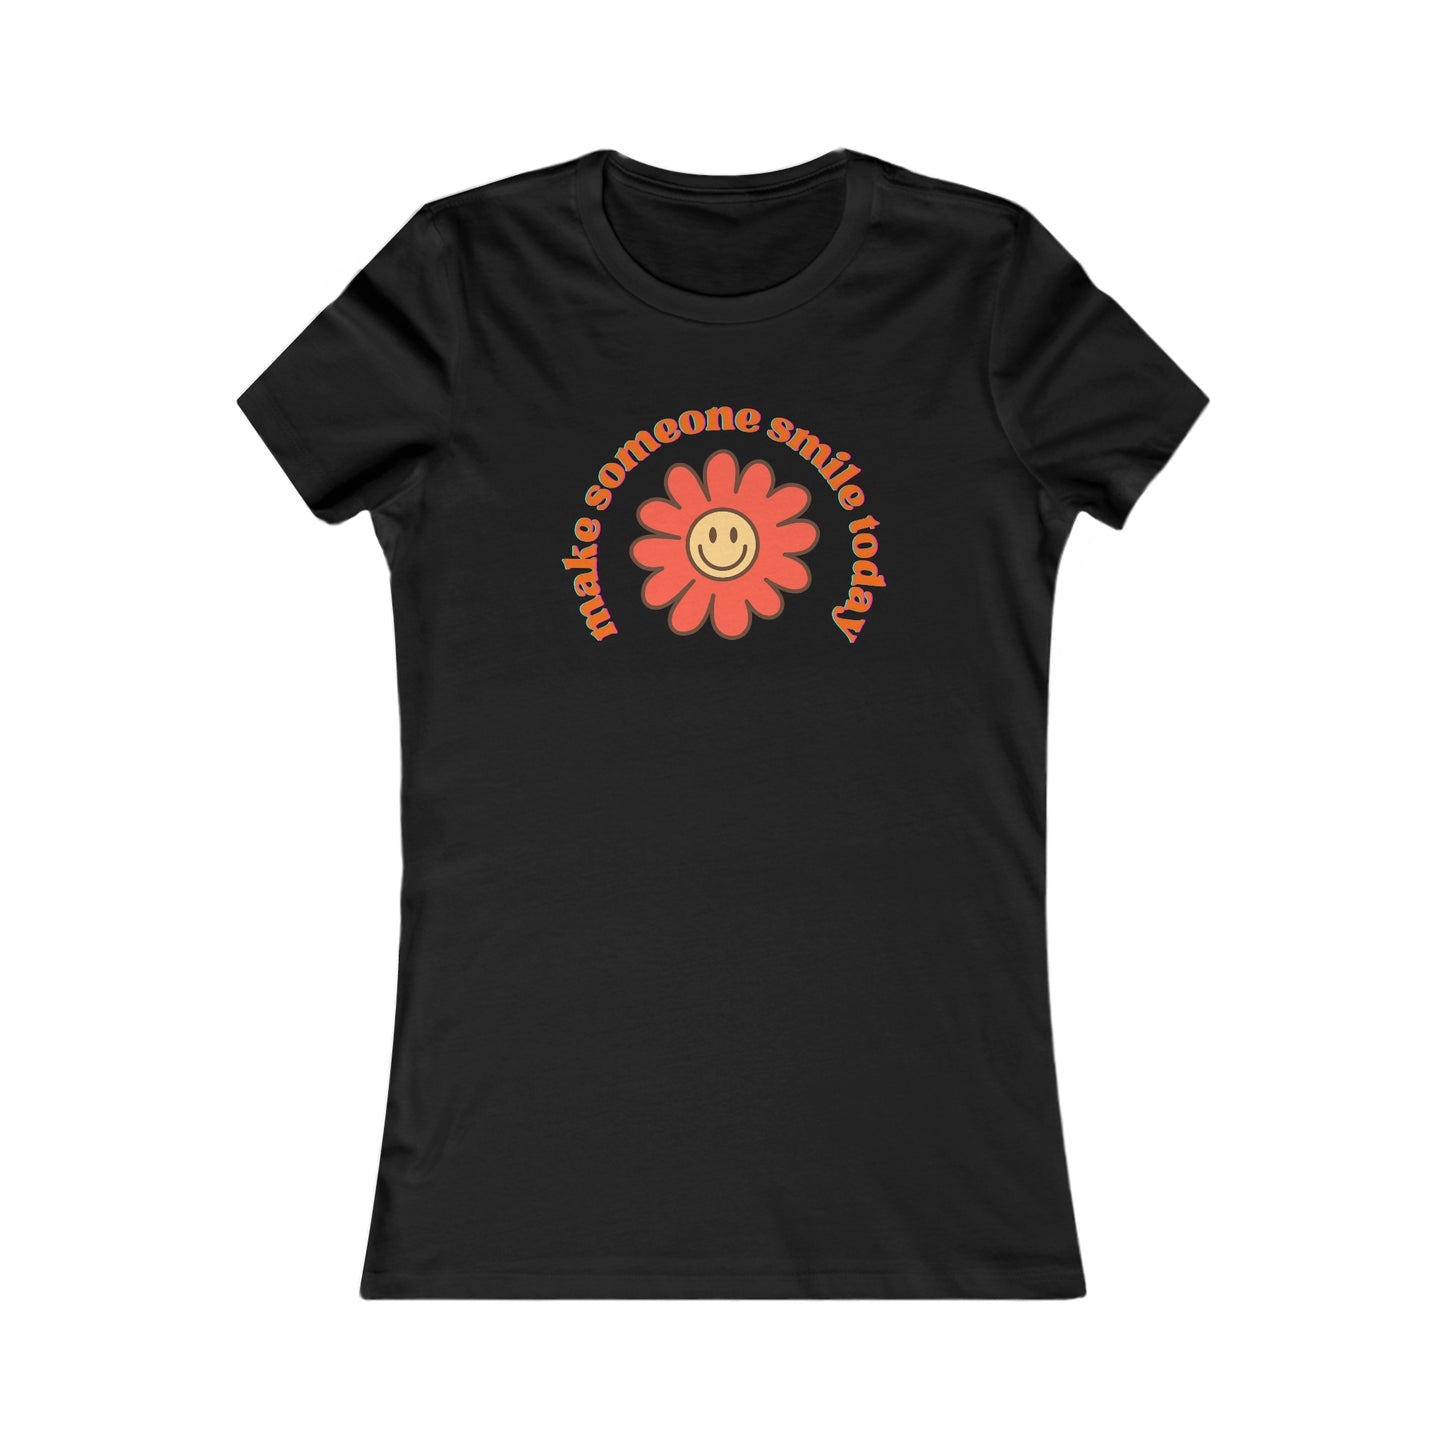 A call to “make someone smile today” message in the center of this Women's Favorite Tee design. Try it, you’ll be happy you did. Slim fit so please check the size table.